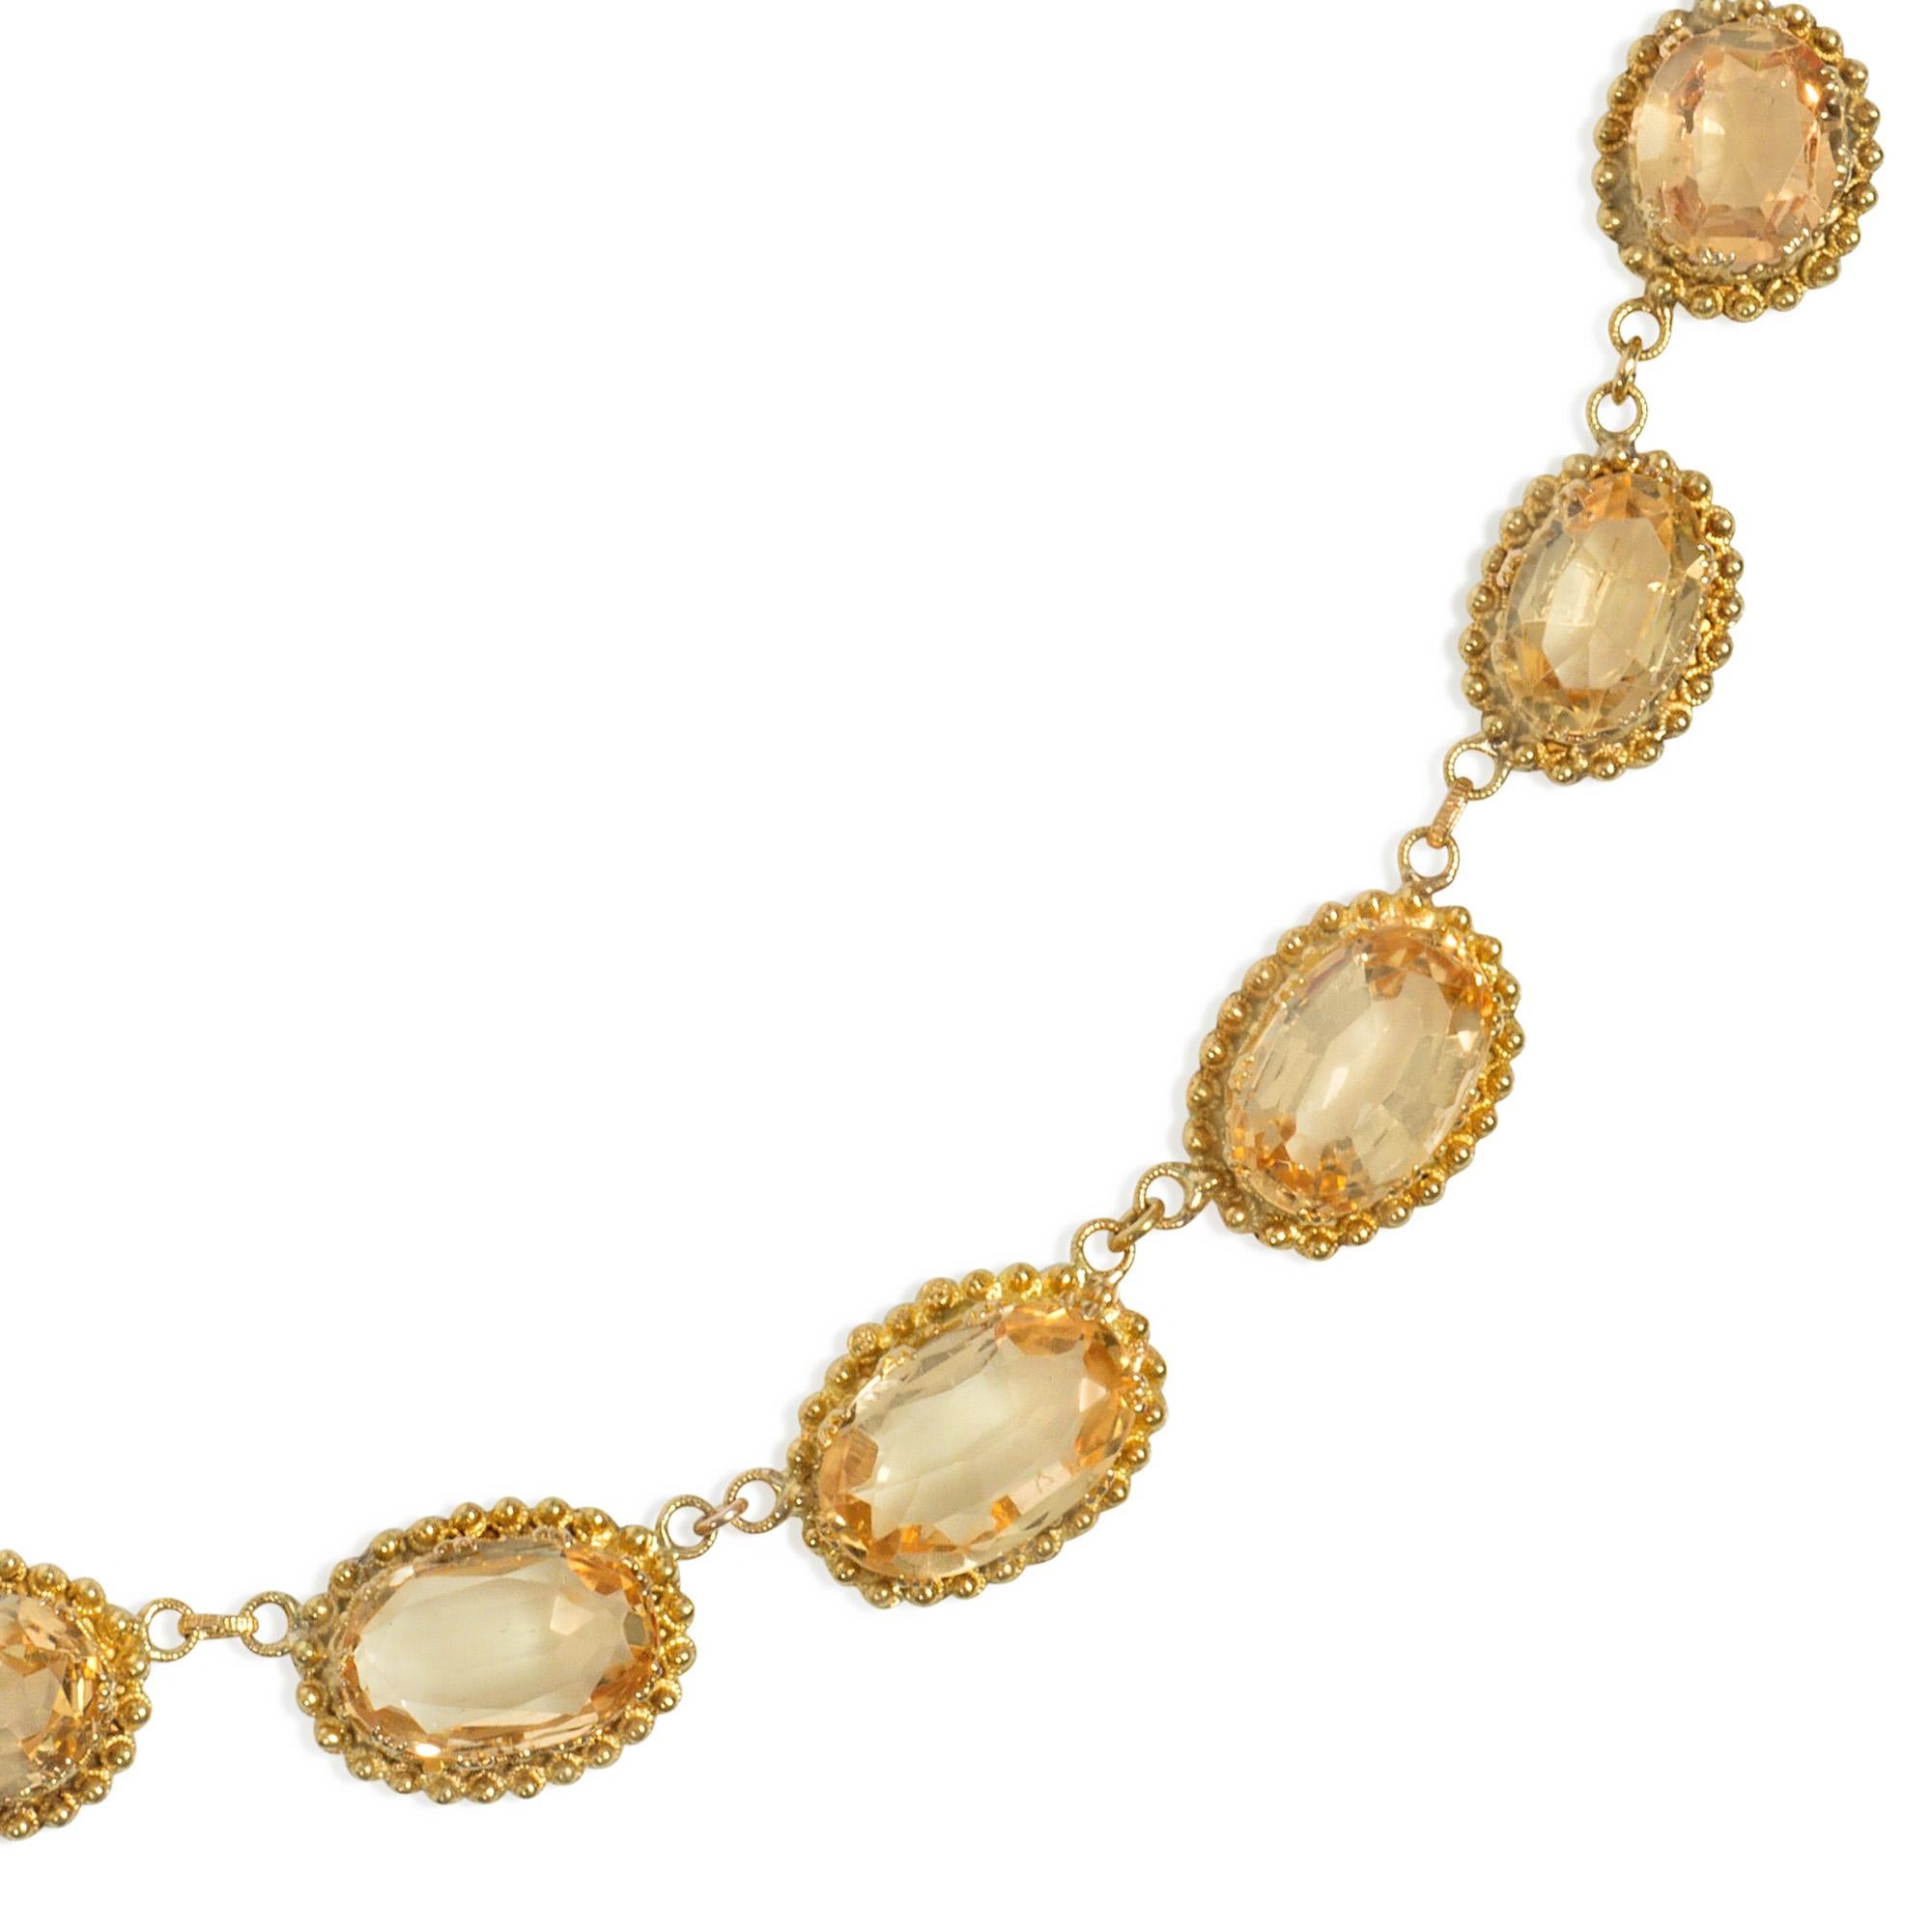 Oval Cut Victorian Gold and Graduated Topaz Rivière Necklace